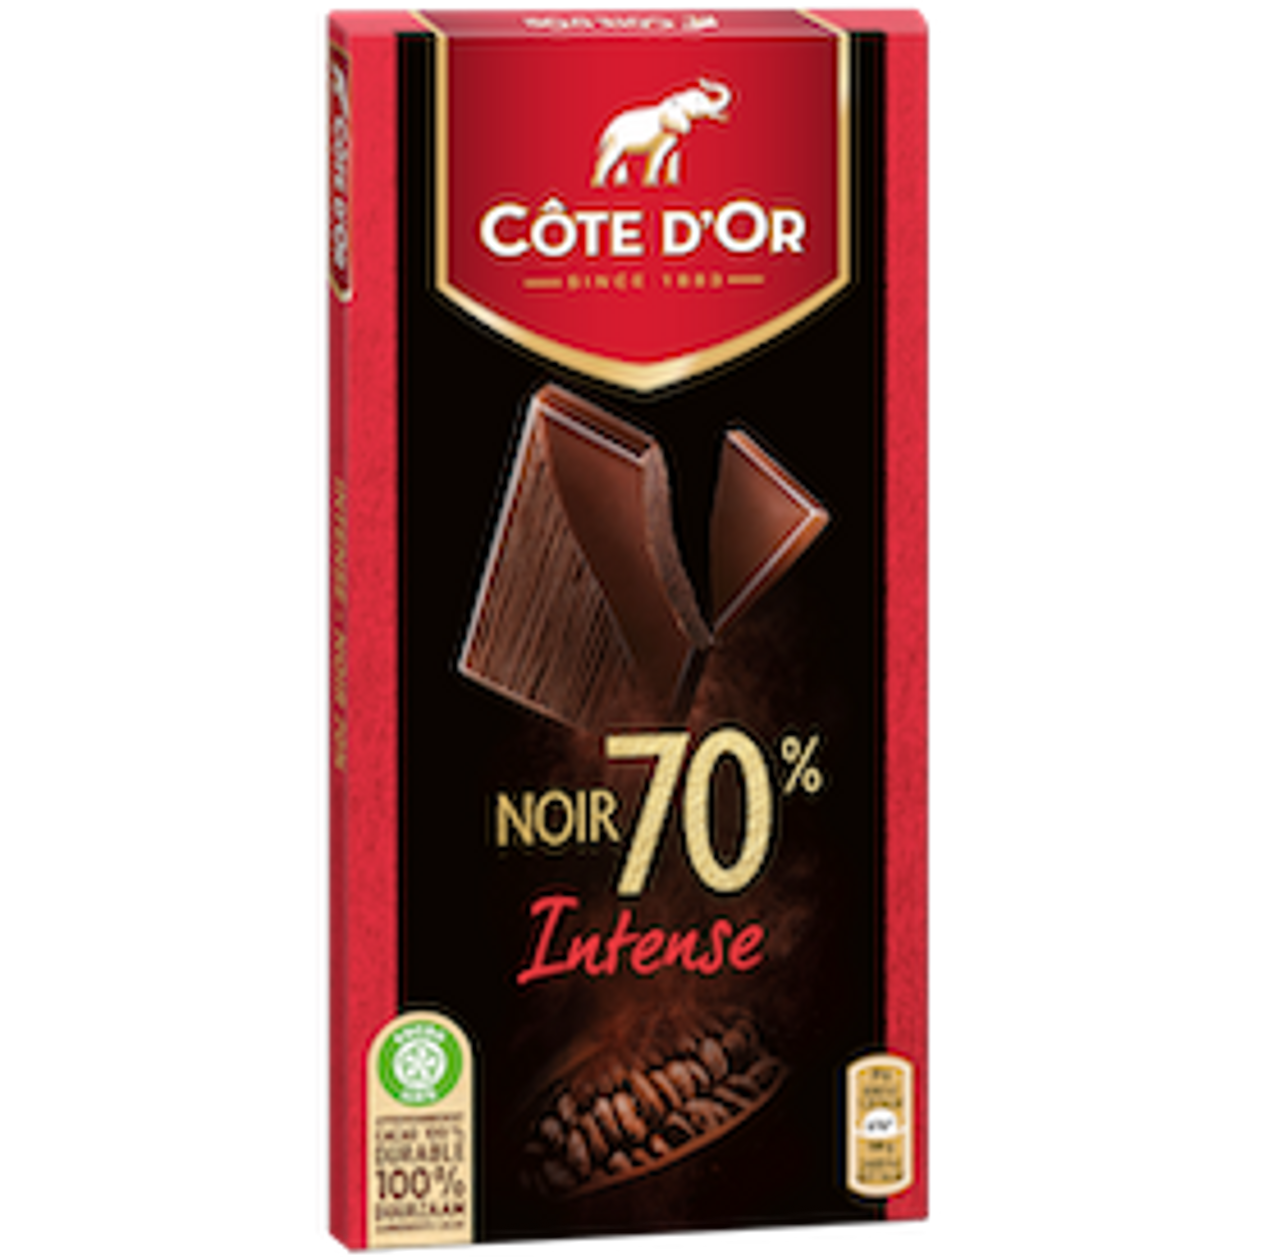 Côte d'or Chocolate